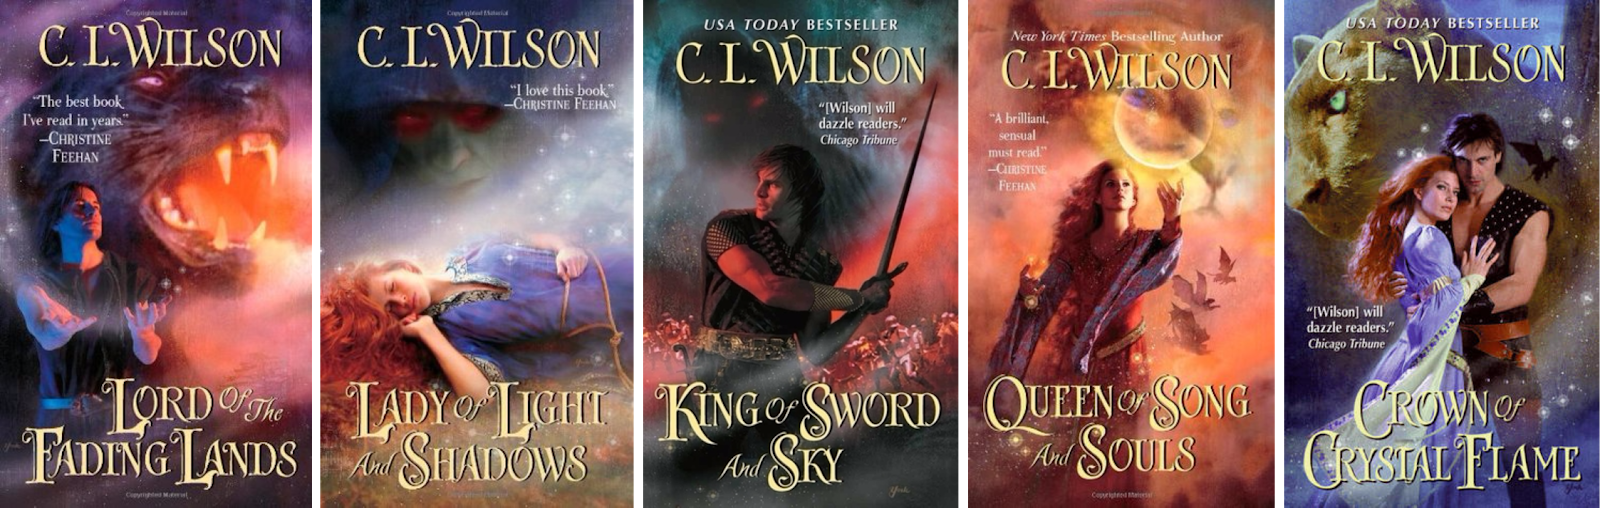 Lord of the Fading Lands by C.L. Wilson